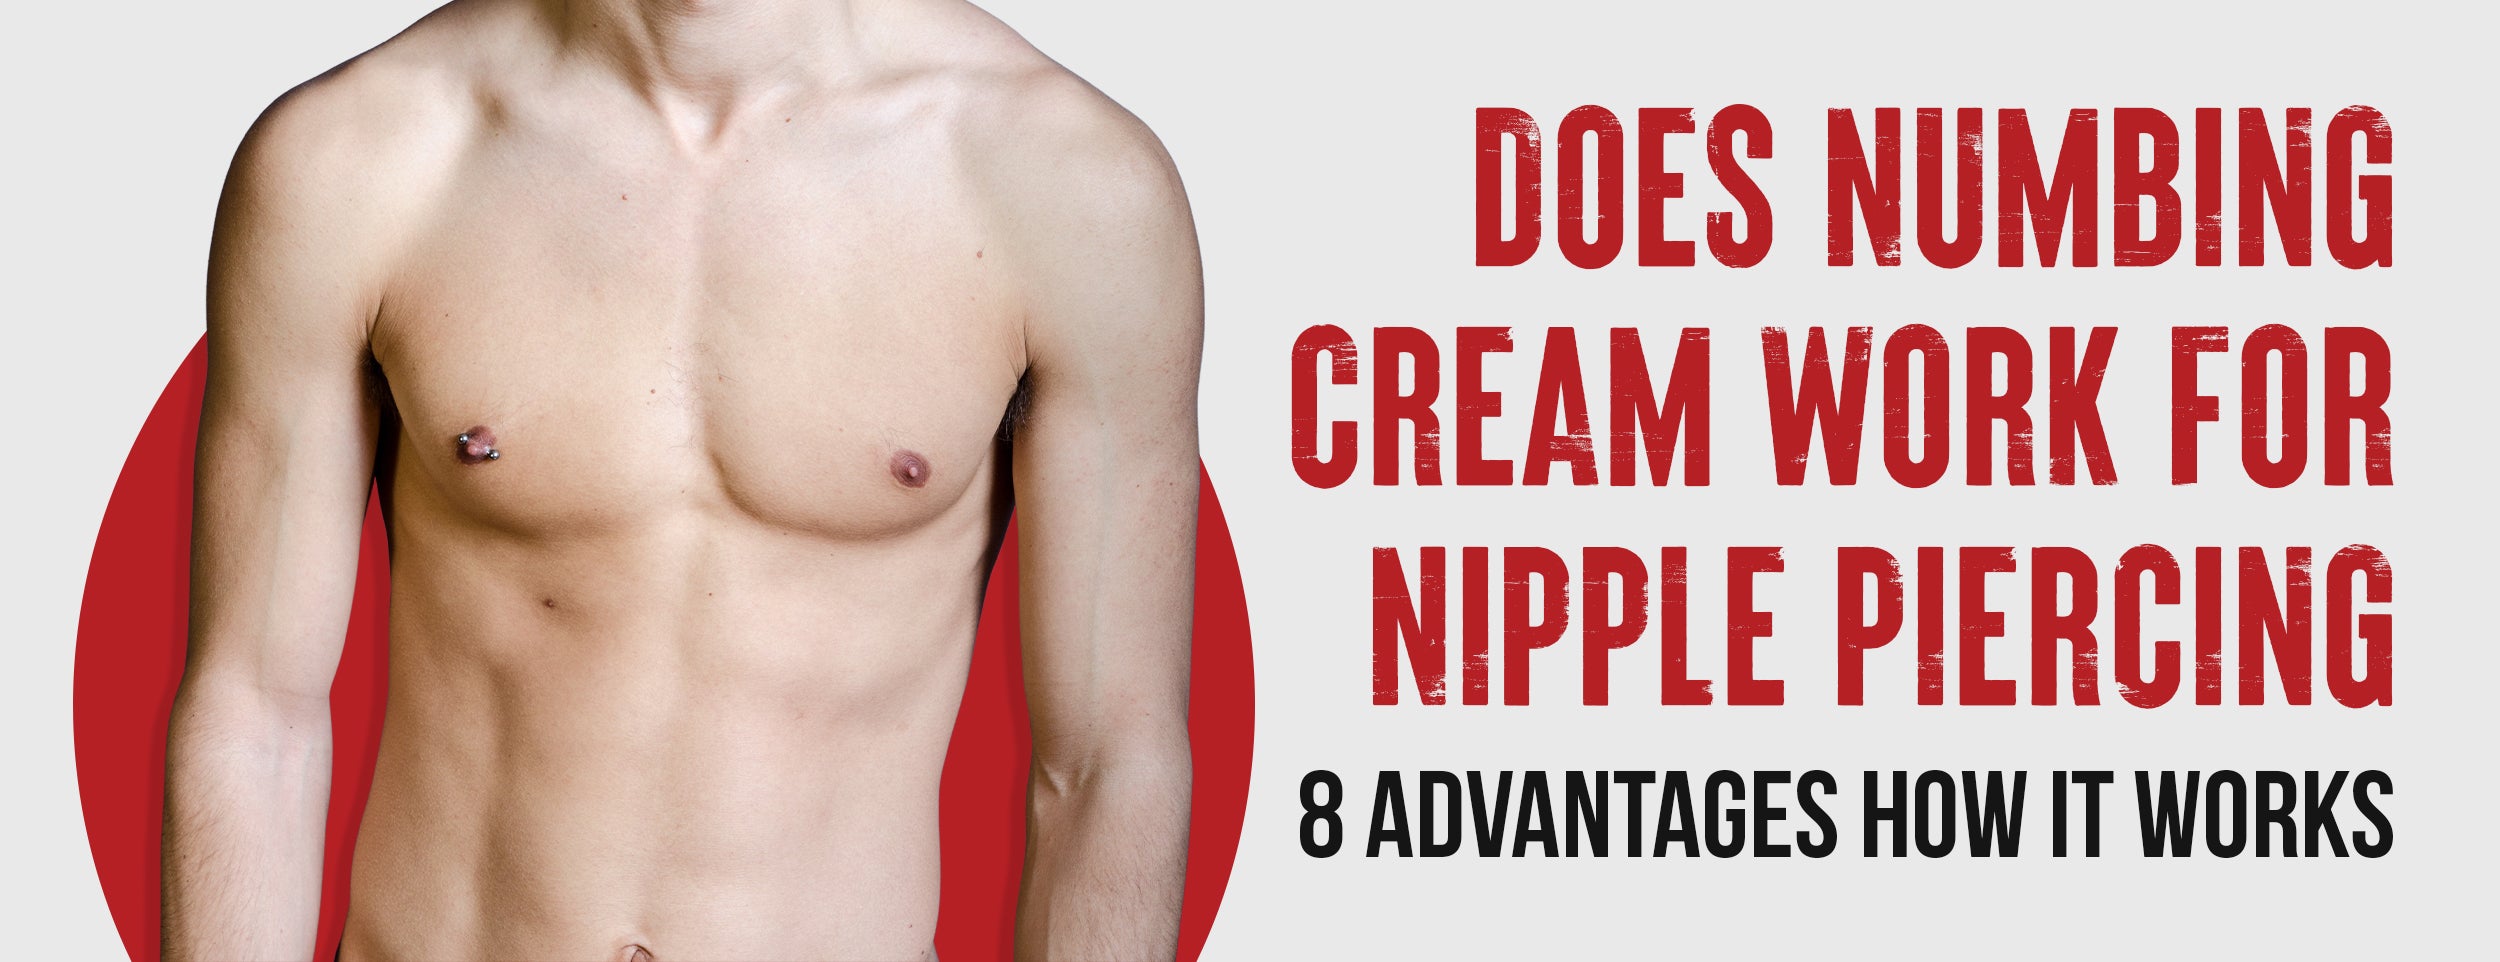 The 8 Advantages of Numbing Cream for Nipple Piercing